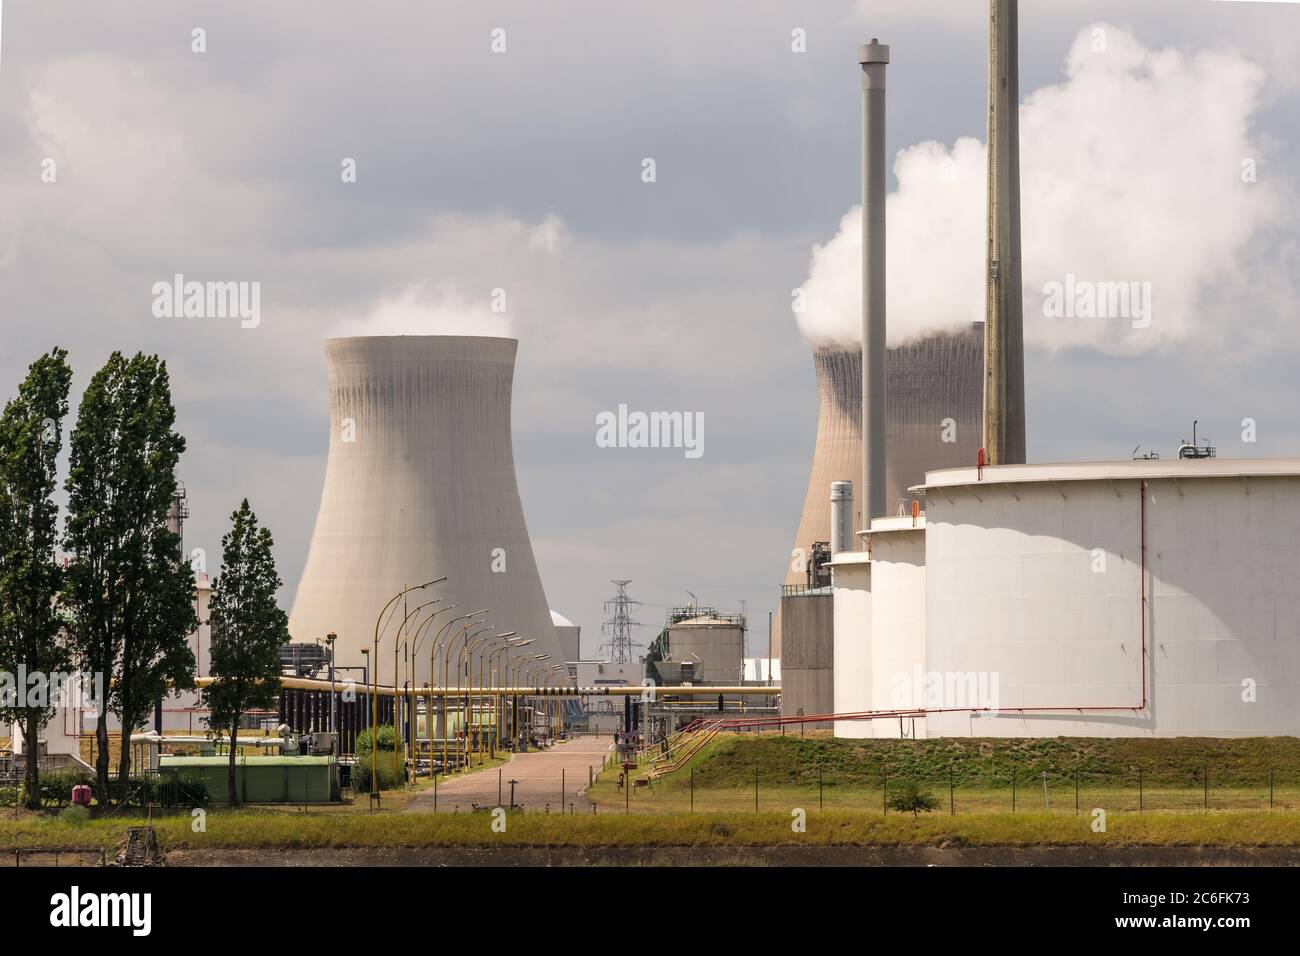 Antwerp, Belgium - June 8th, 2019: View over some petrochemical industry installations in the port of Antwerp to the Nuclear Power Plant Doel Stock Photo